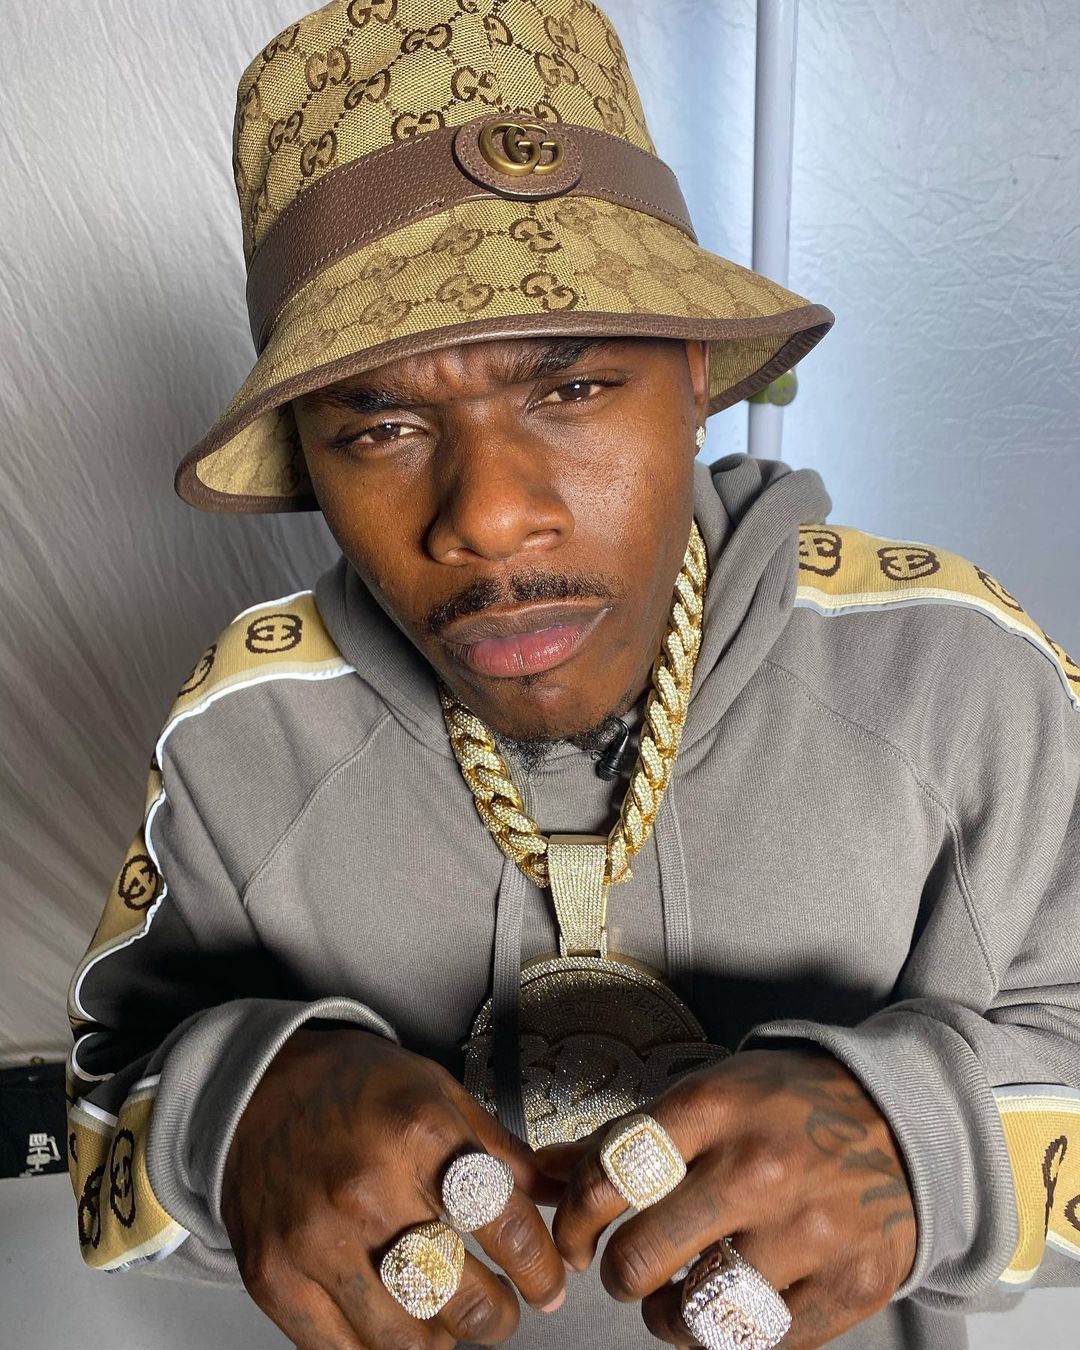 UpscaleHype on Instagram: @Dababy steps out wearing @Gucci. #upscalehype # dababy #dababyuh #gucci